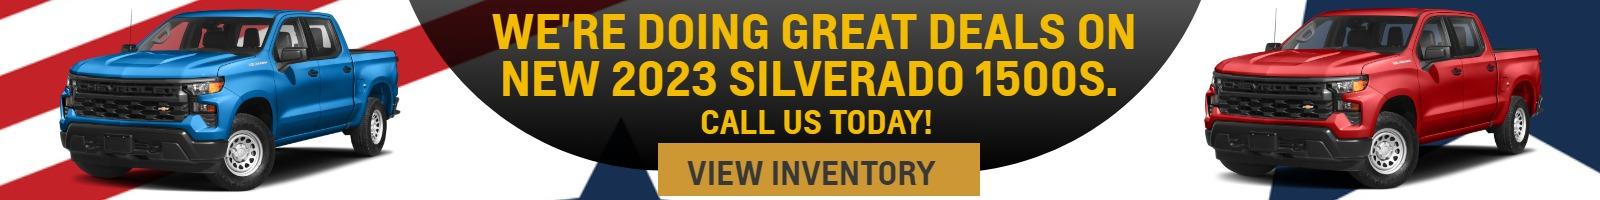 WE'RE DOING GREAT DEALS ON NEW 2023 SILVERADO 1500S. CALL US TODAY!